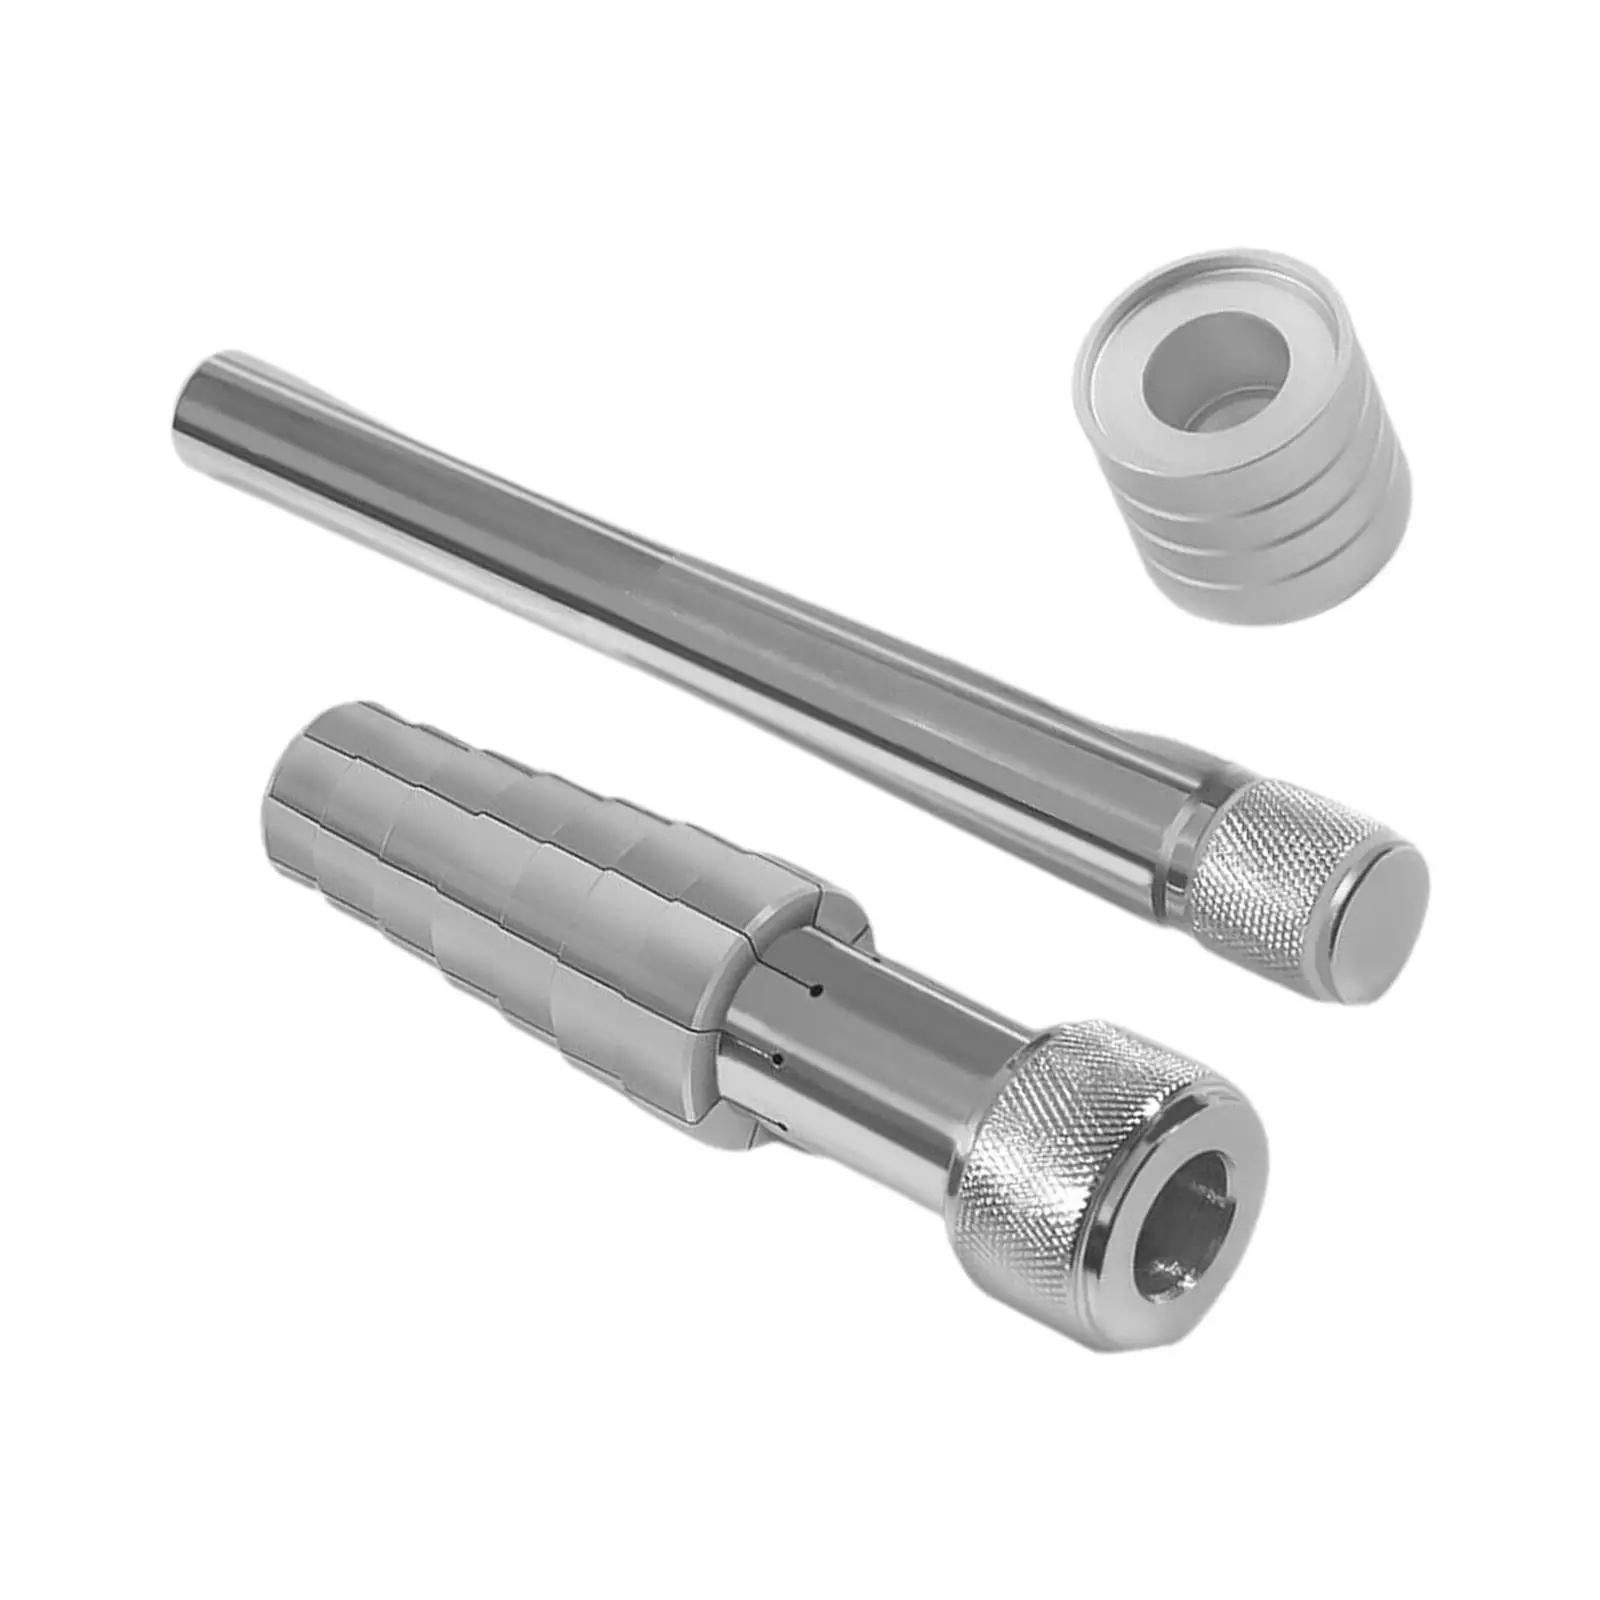 Ring Stretcher, Enlarger Expander Mandrel Finger Wedding Band Sizers Jewelry Ring Sizing Tool